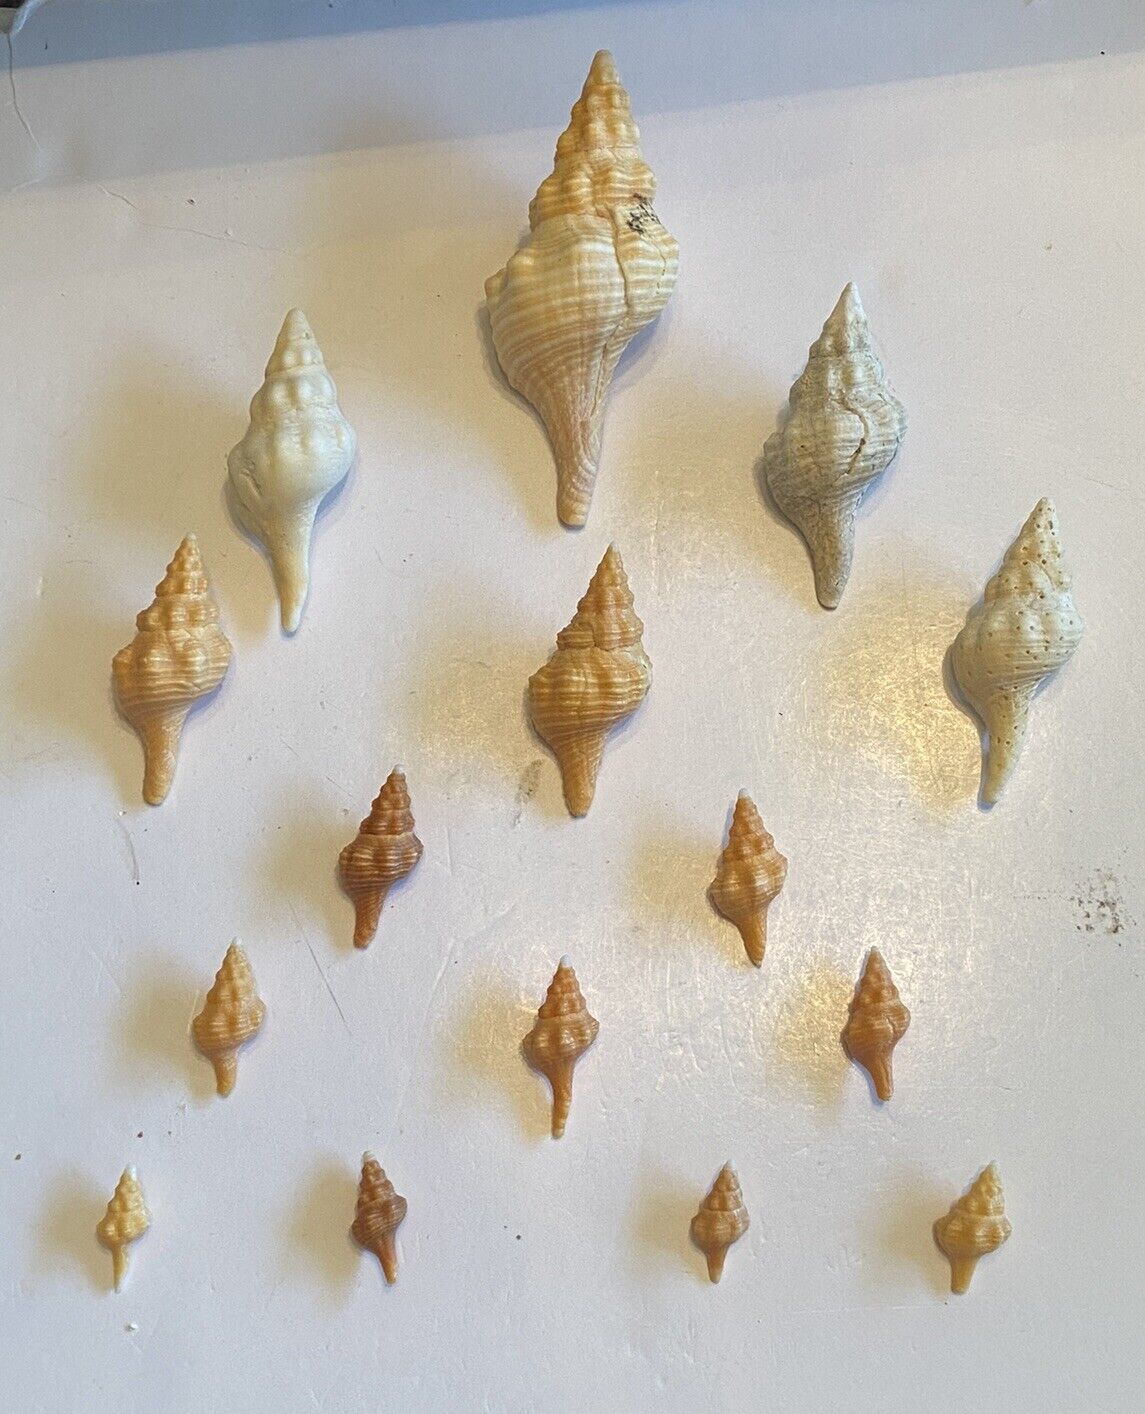 Horse Conches , FL Cones, Whelks, And True Tulip Shells From SW Florida